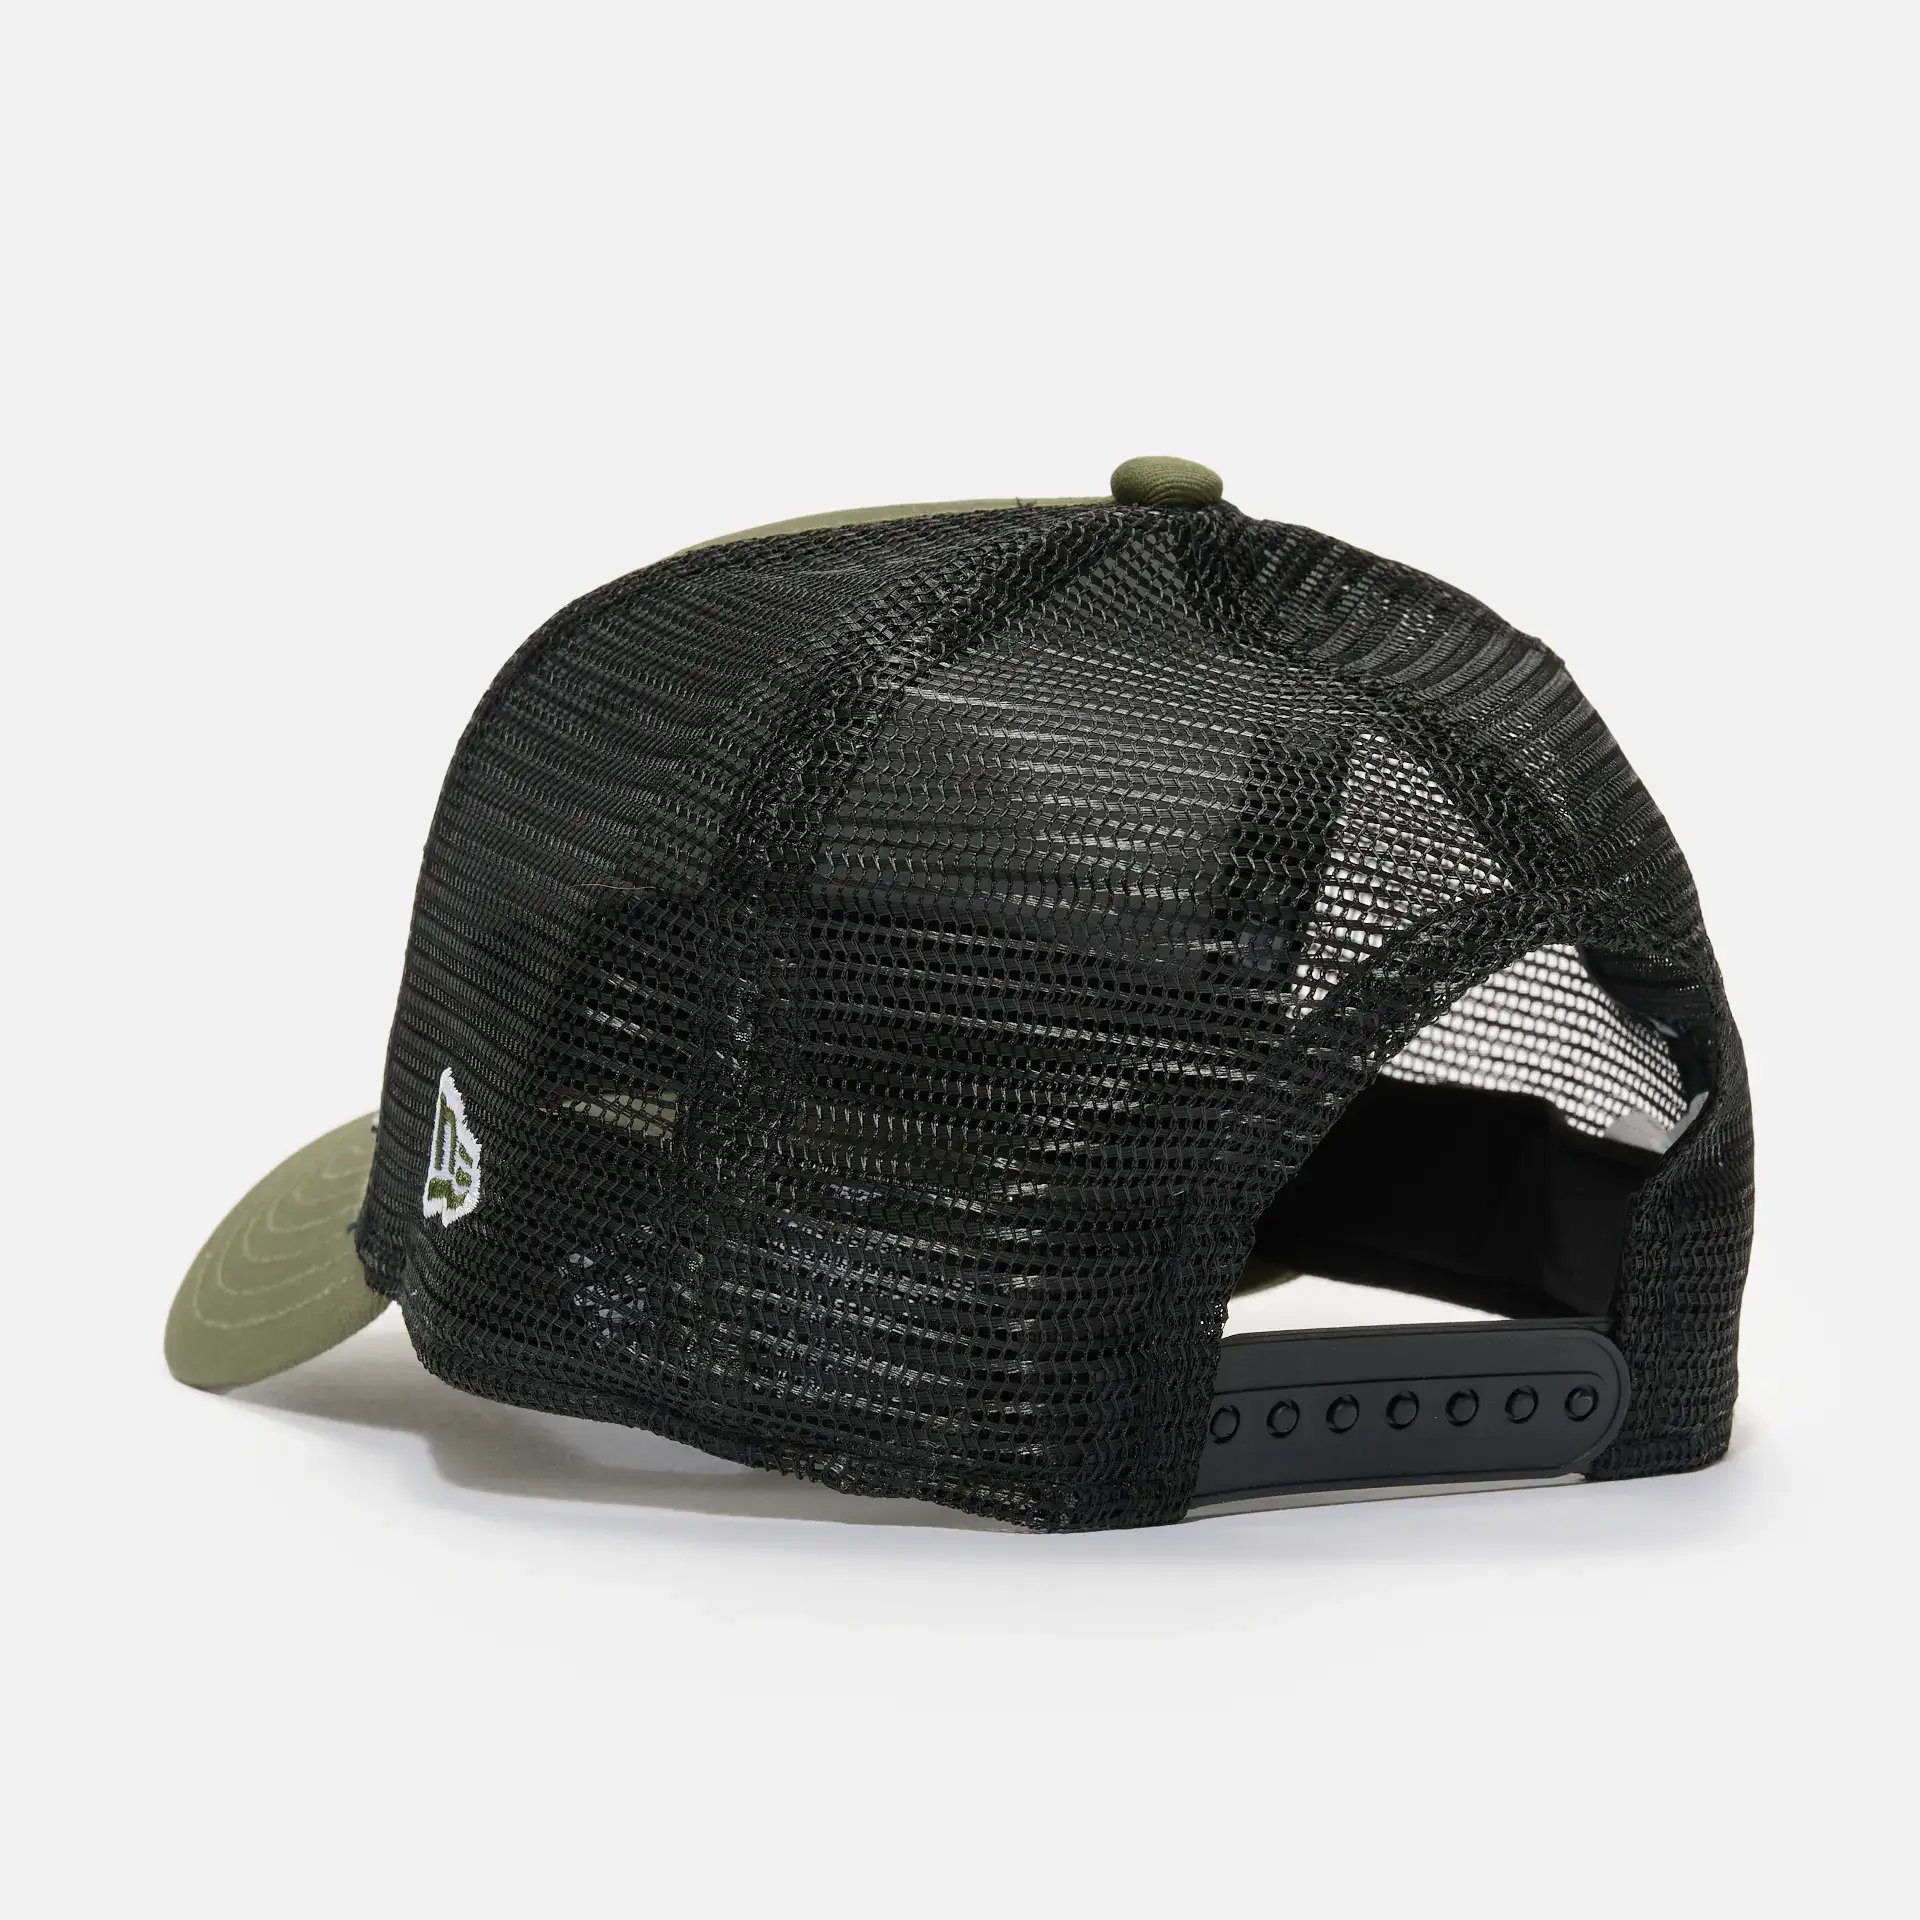 New Era State Patch 9Forty Trucker Cap New Olive/Scarlett